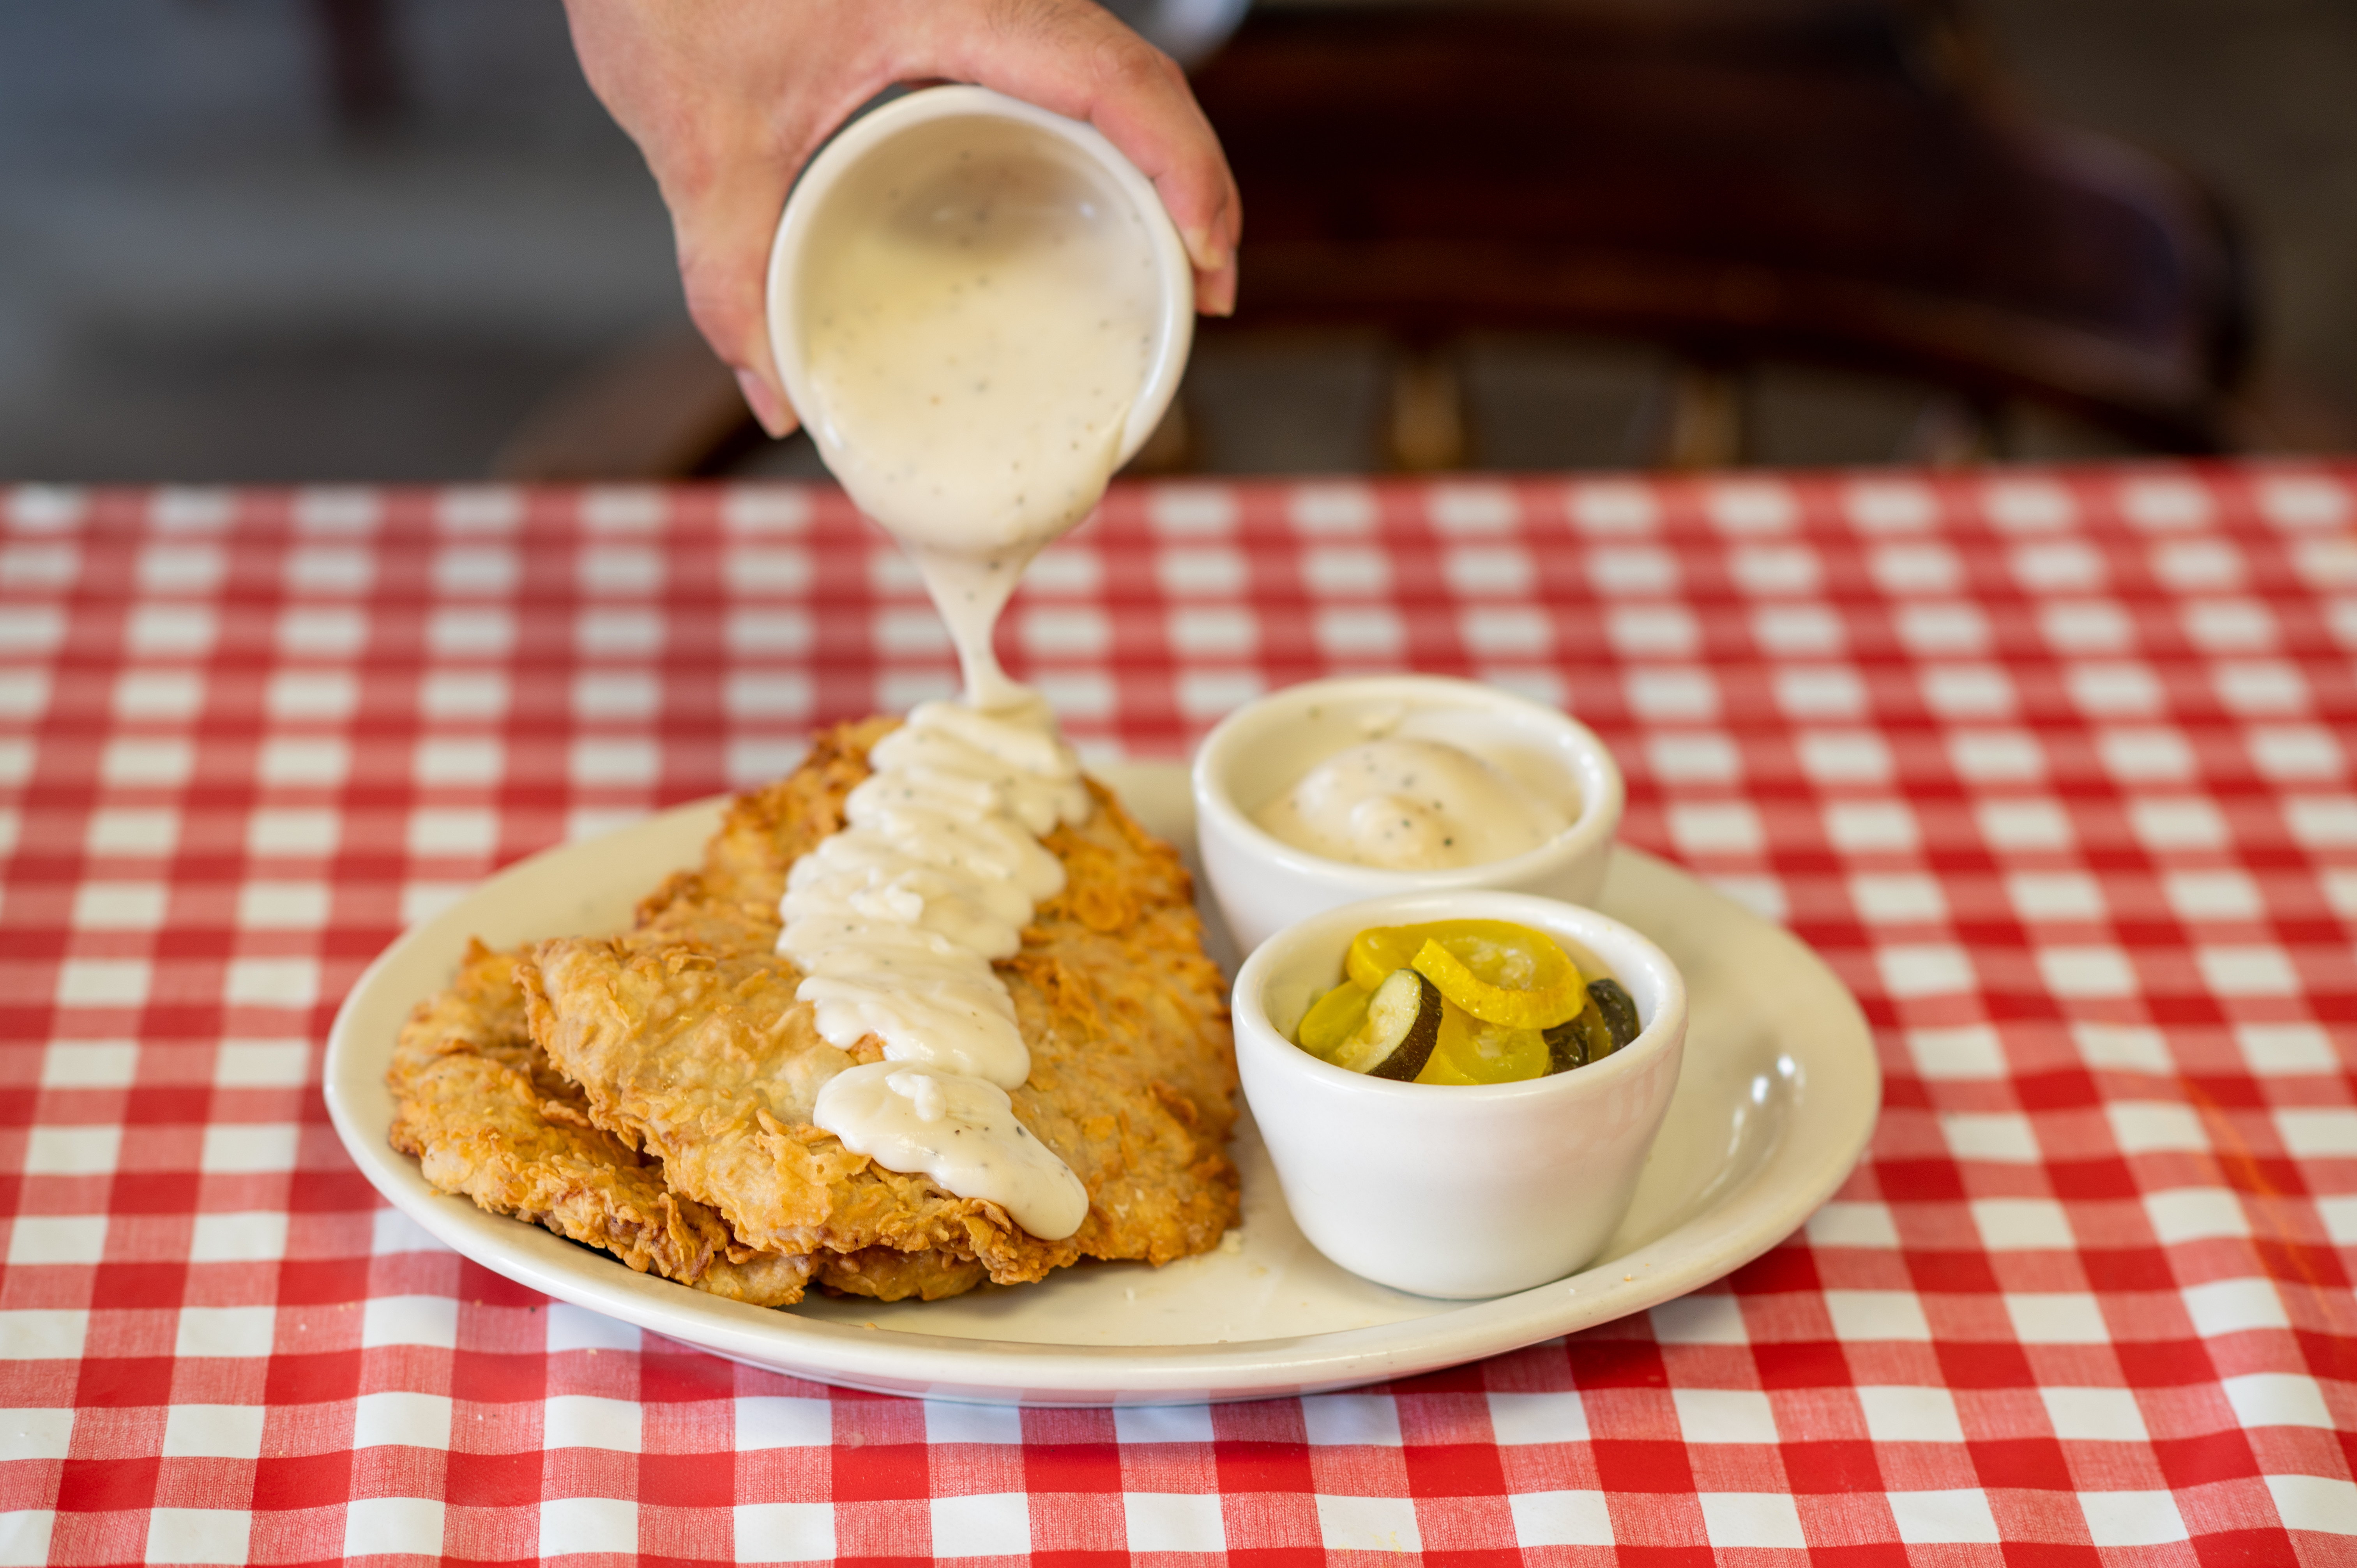 A table with a red checkered tablecloth holds a plate of chicken-fried steak with cream gravy, with two ramekins of mashed potatoes and squash. Above it, a hand holds a third ramekin with gravy that is still pouring out.